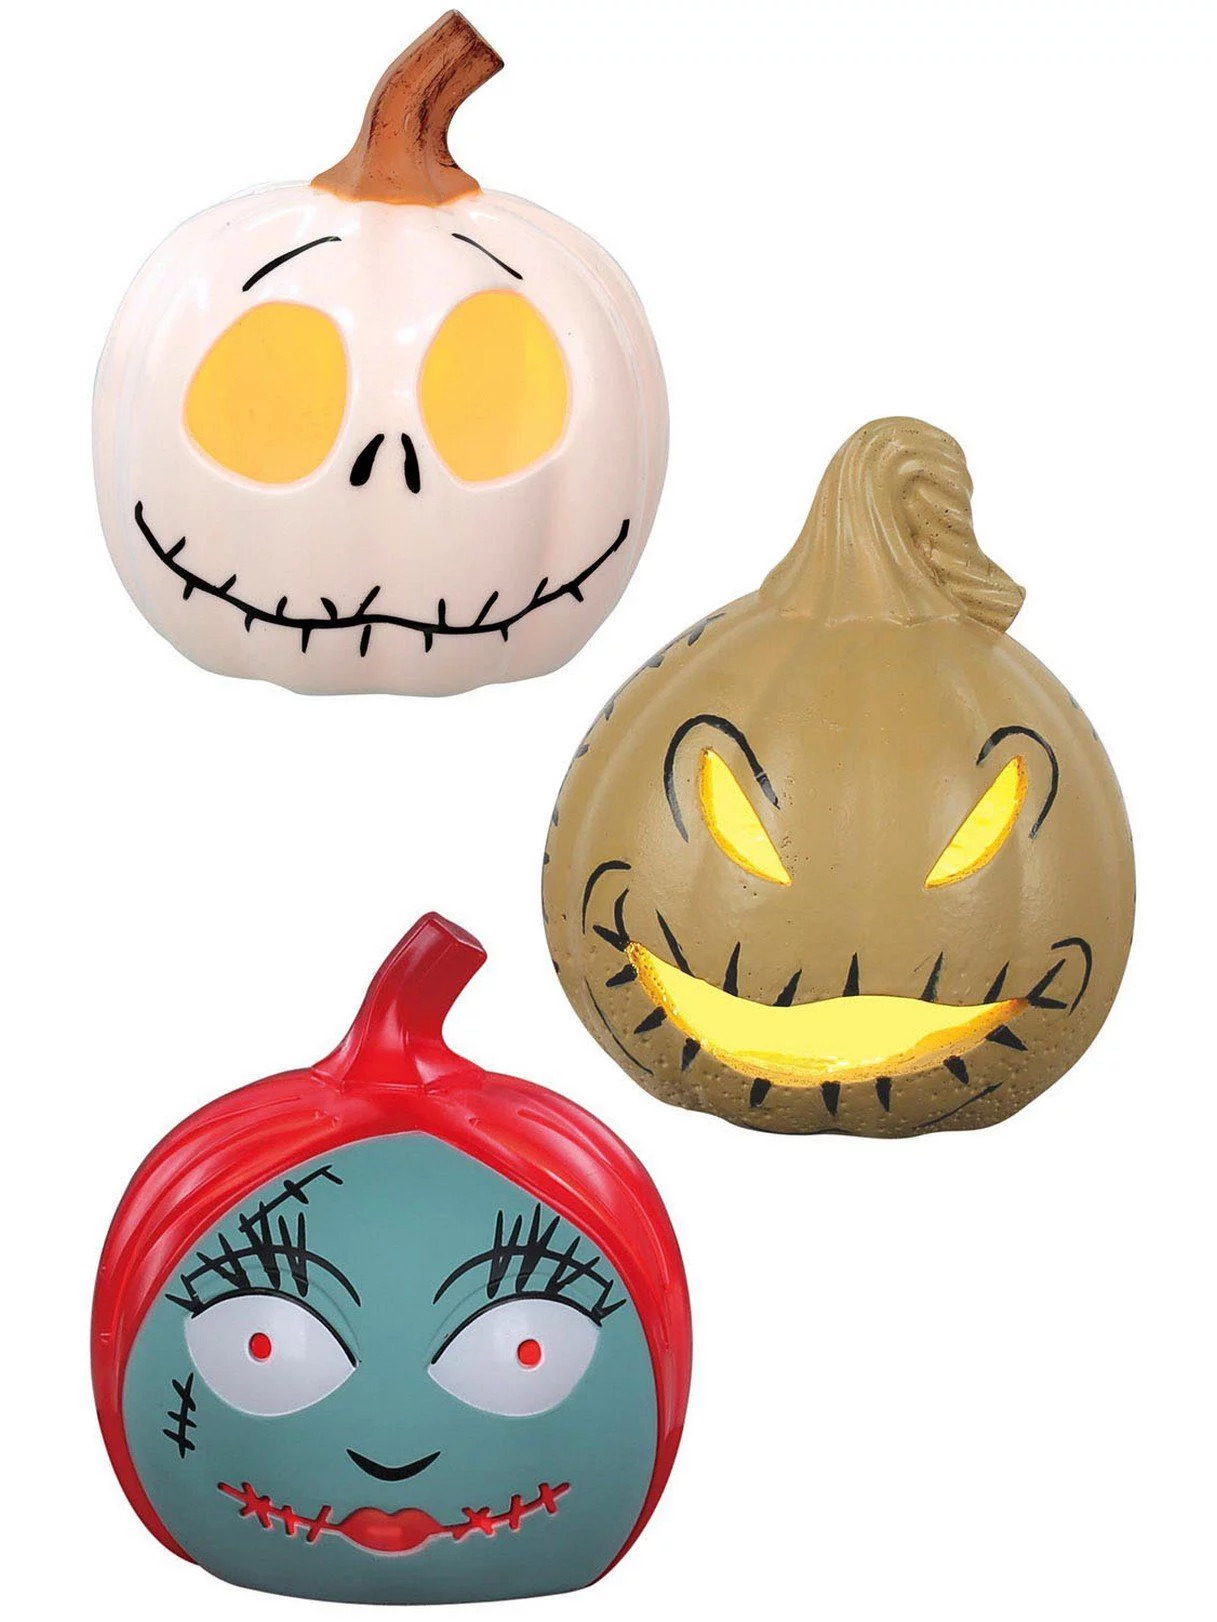 The pumpkin lanterns, in the face of jack skellington, oogie boogie, and sally